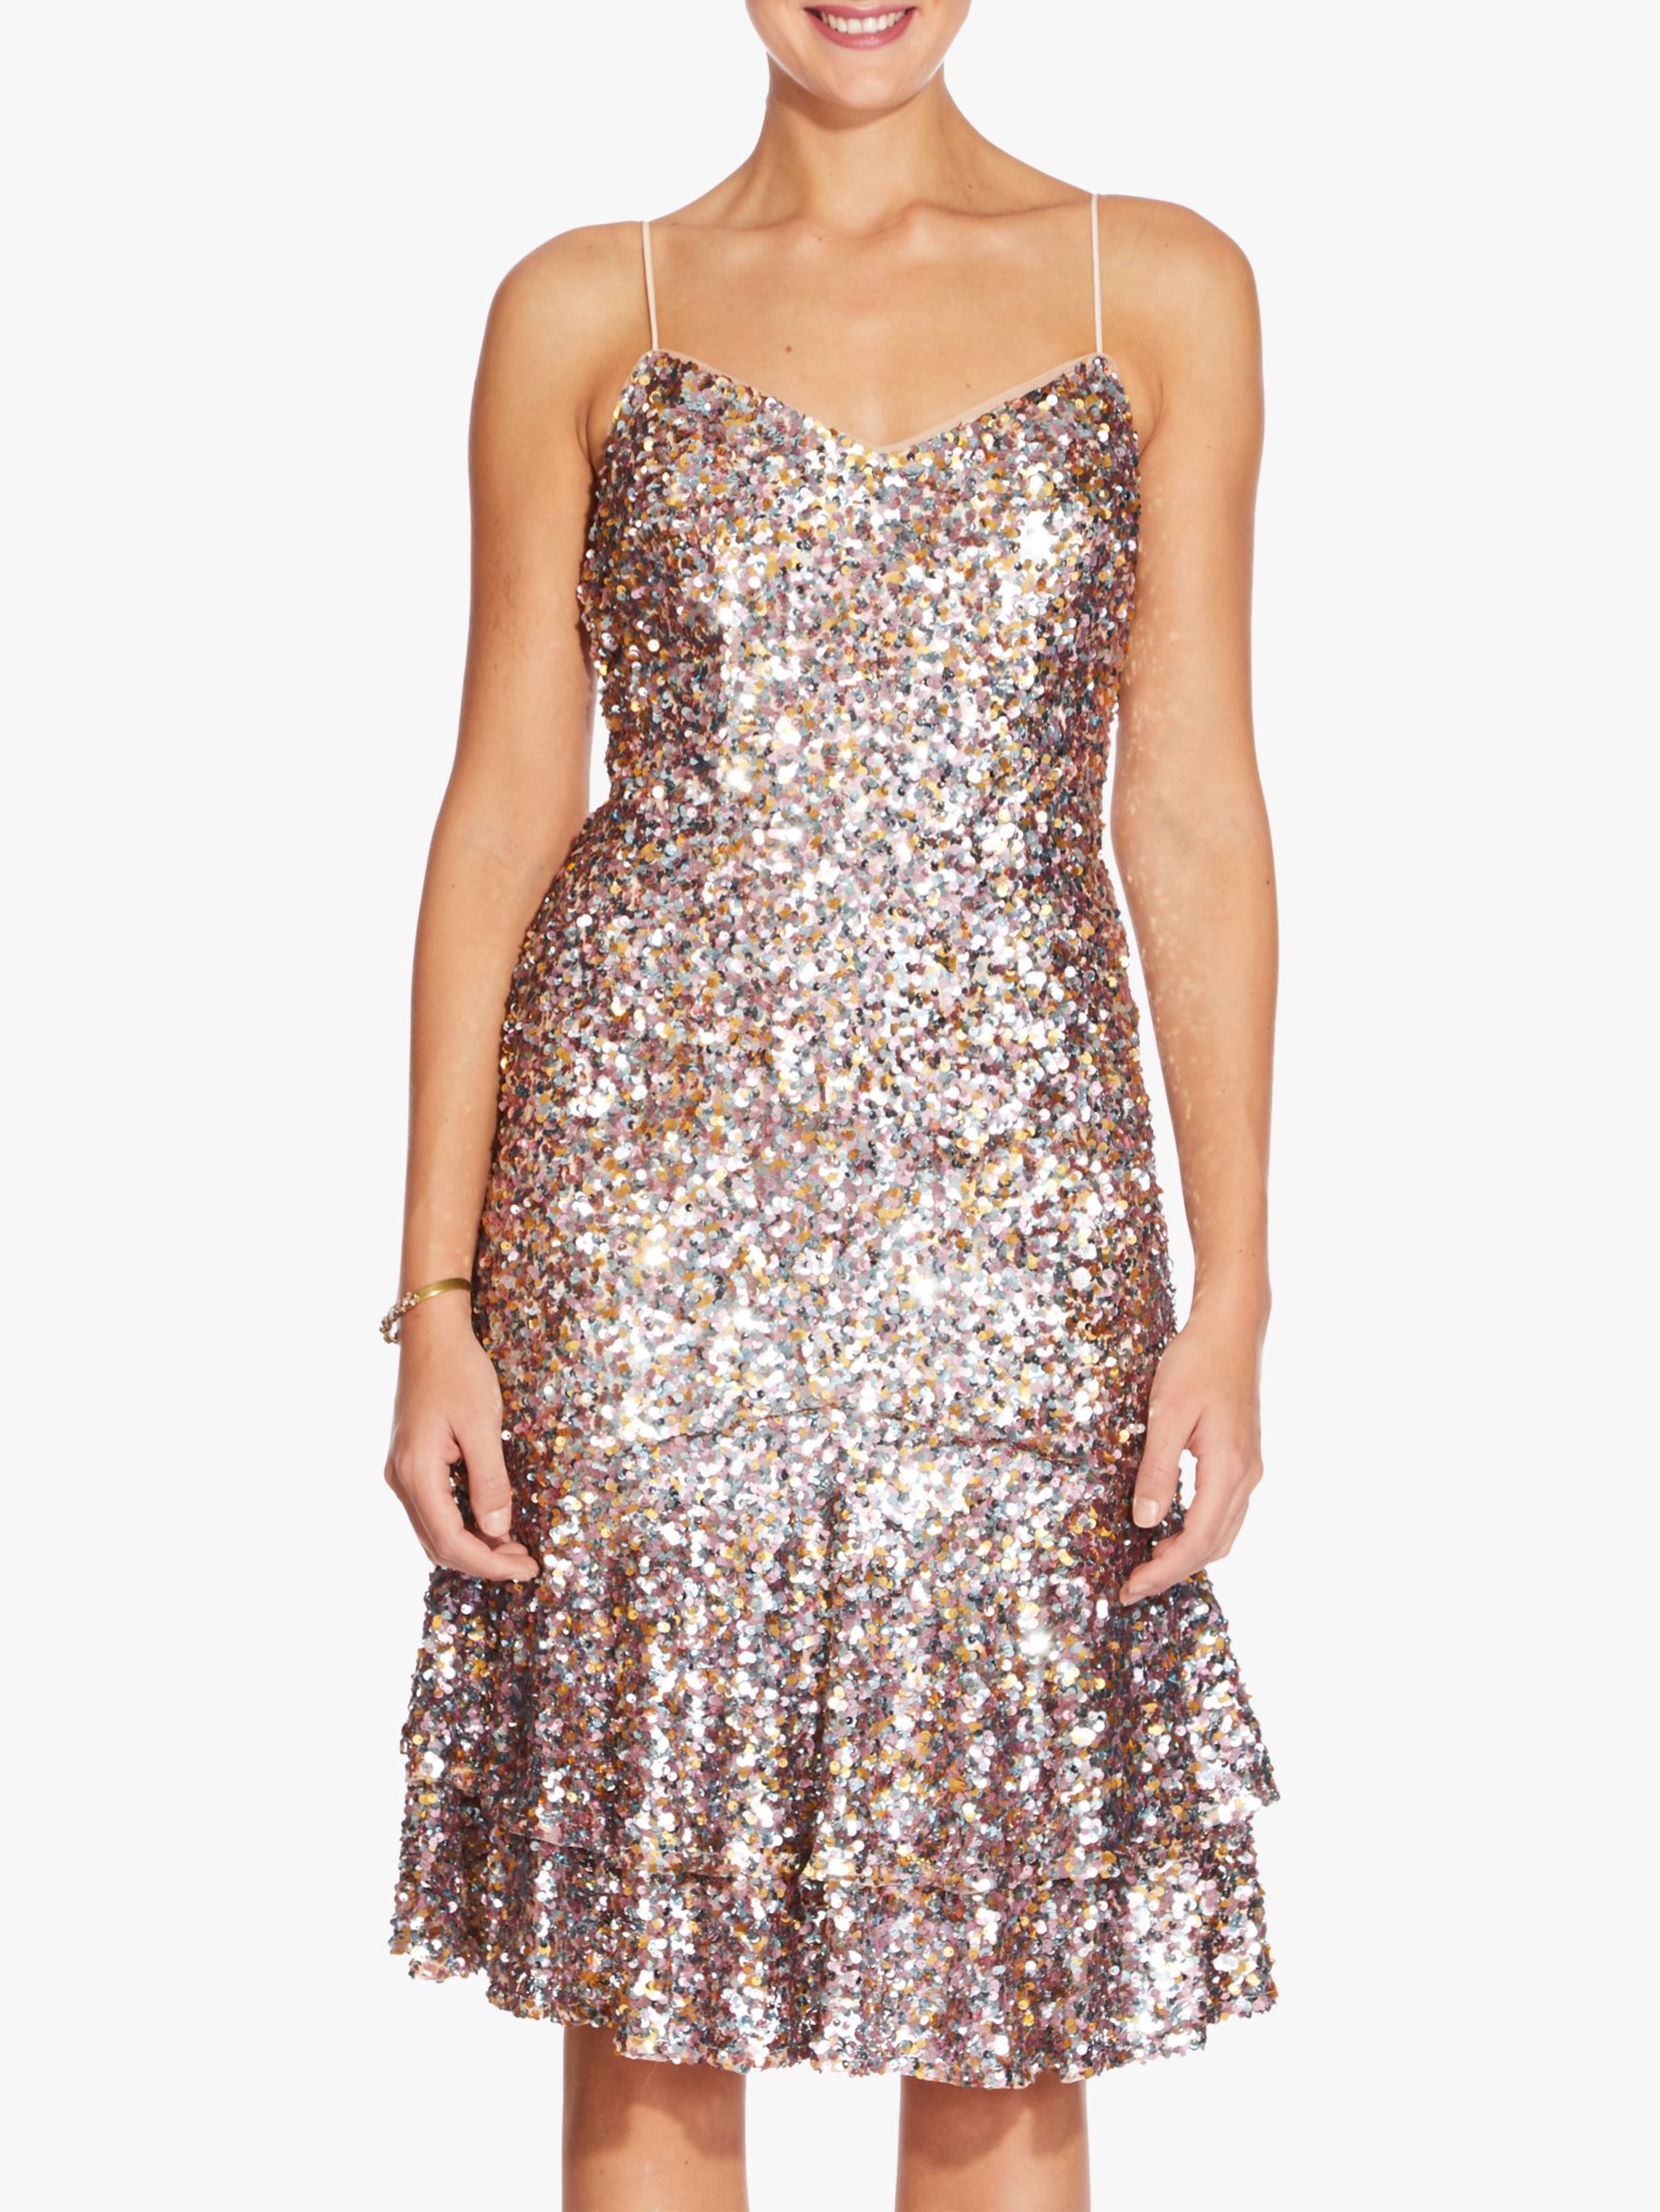 adrianna papell pink sequin dress